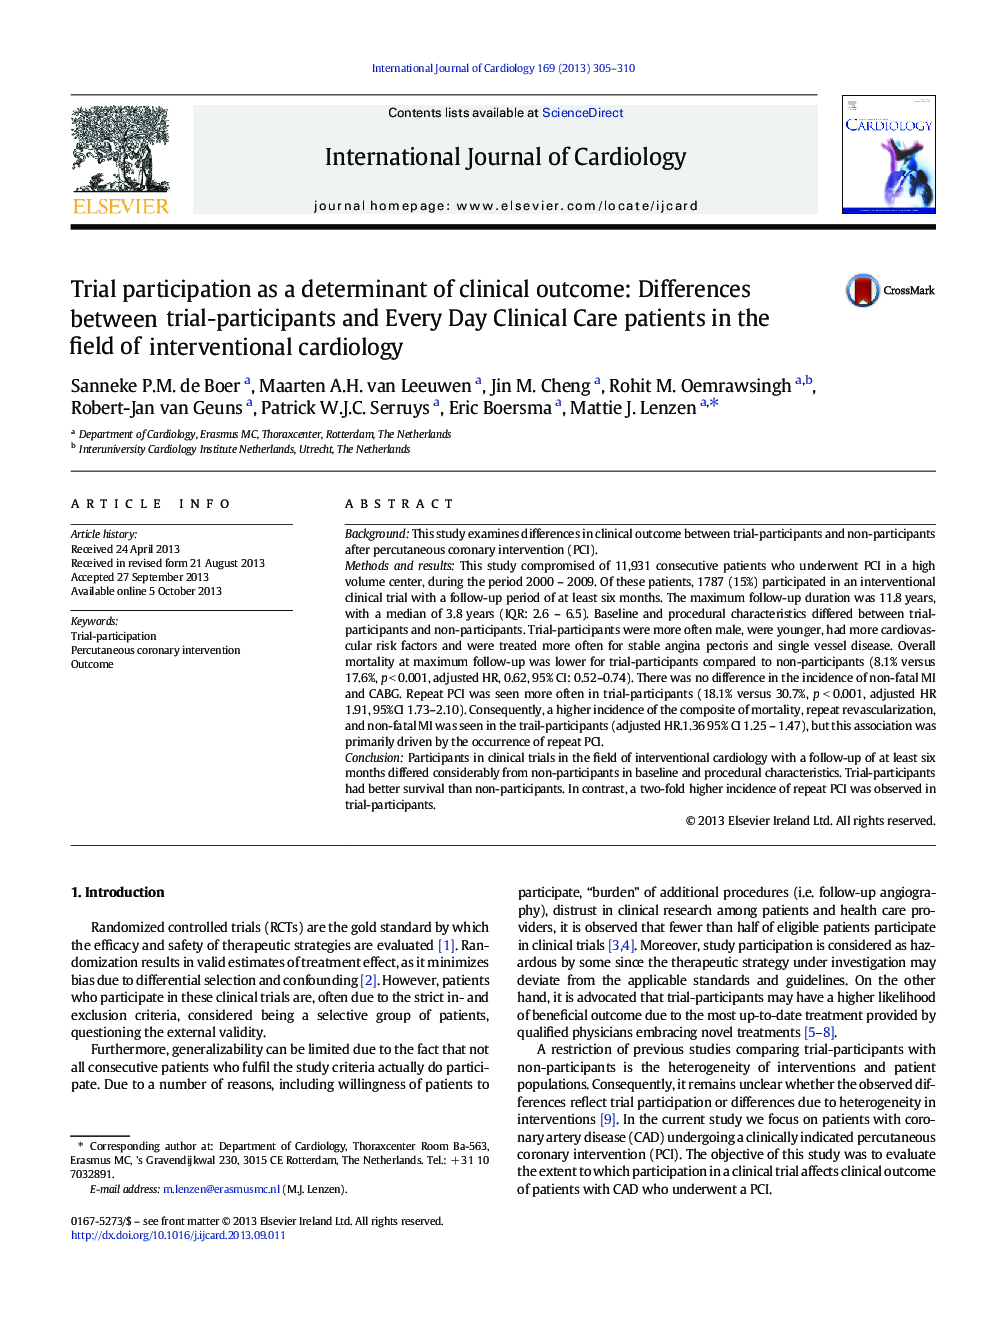 Trial participation as a determinant of clinical outcome: Differences between trial-participants and Every Day Clinical Care patients in the field of interventional cardiology